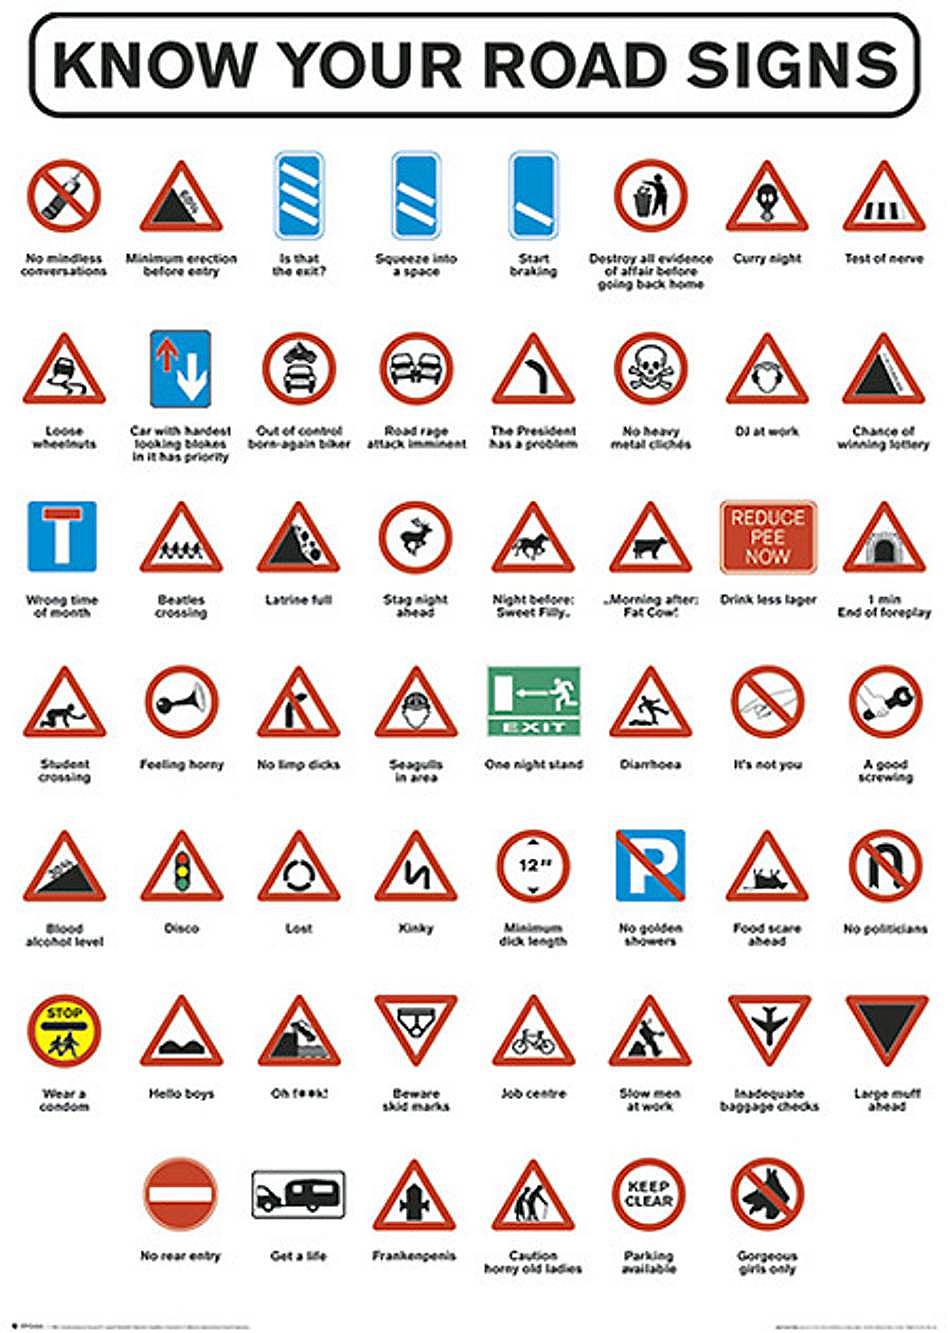 Know your road signs.......